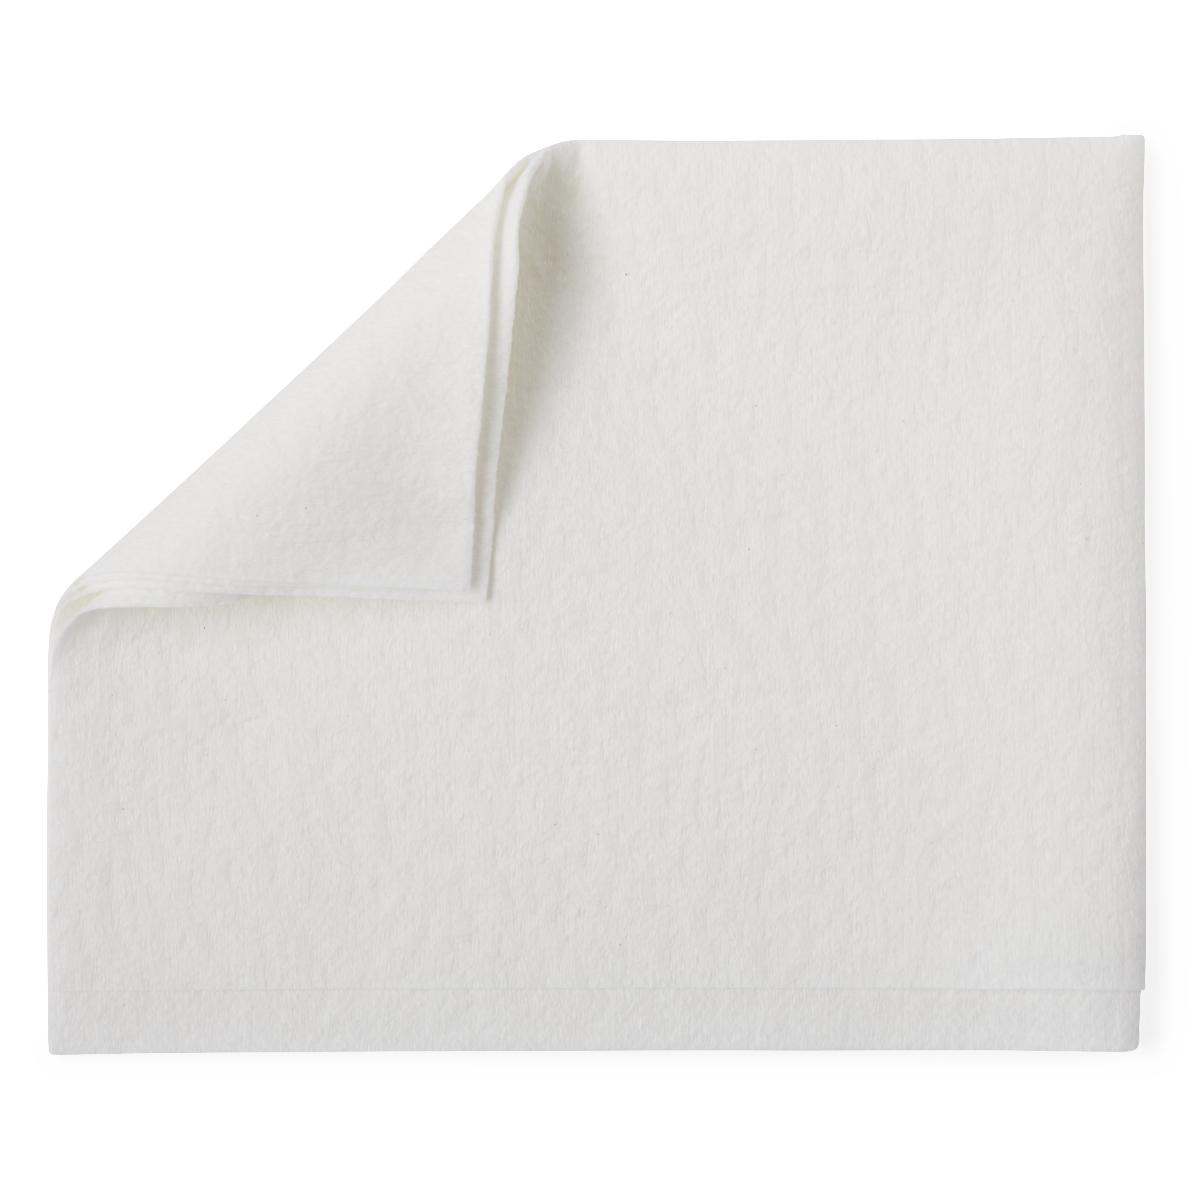 Deluxe Disposable Washcloths (Case of 500)